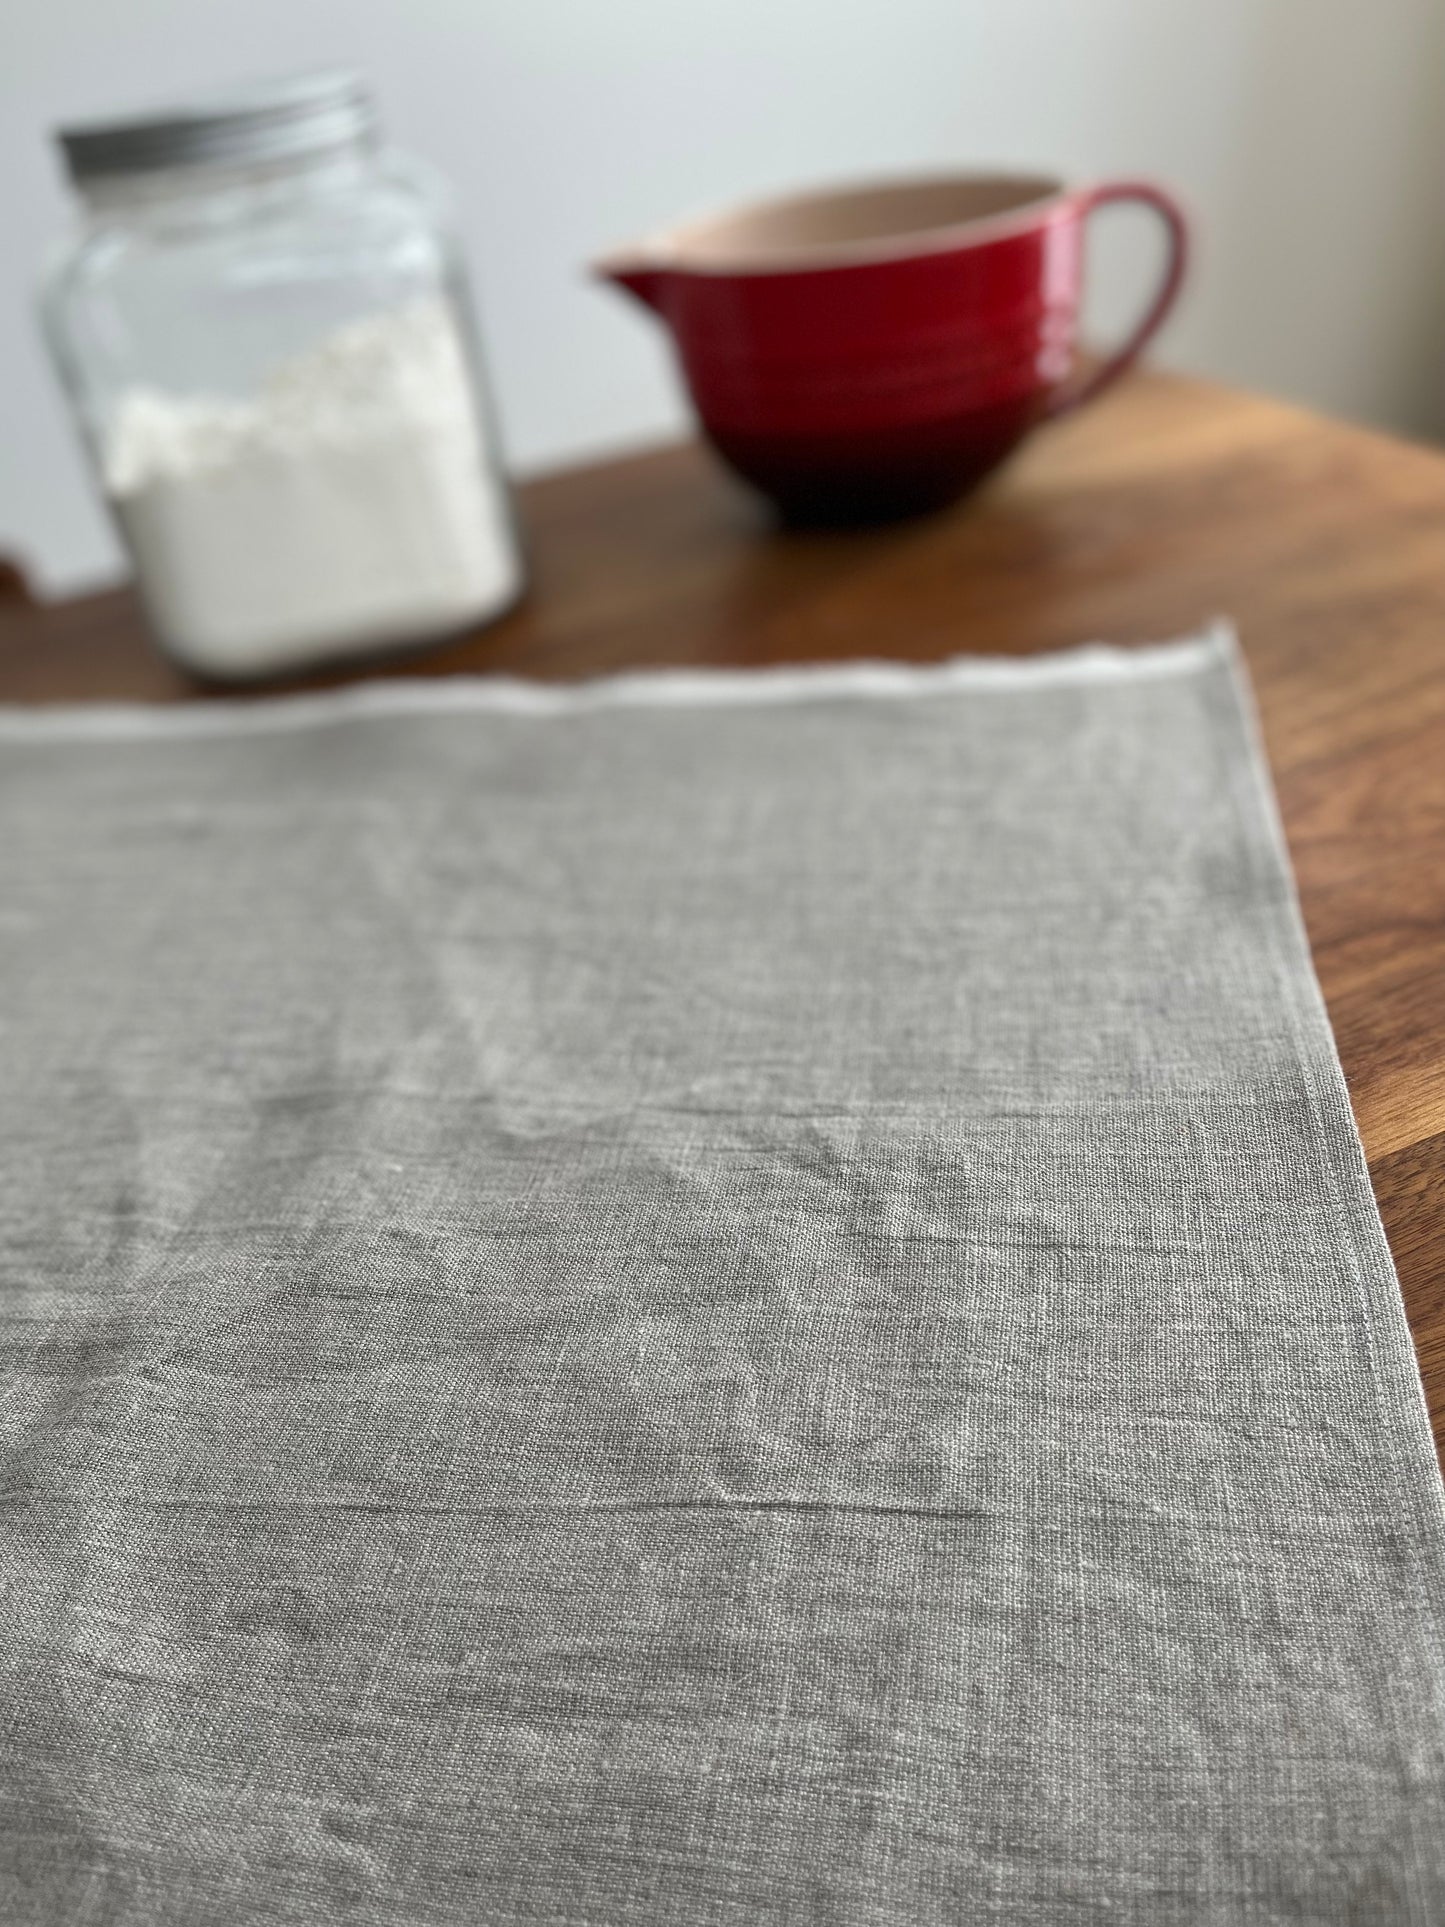 Professional Baker's Couche | Baker's Proofing Cloth in 100% Linen